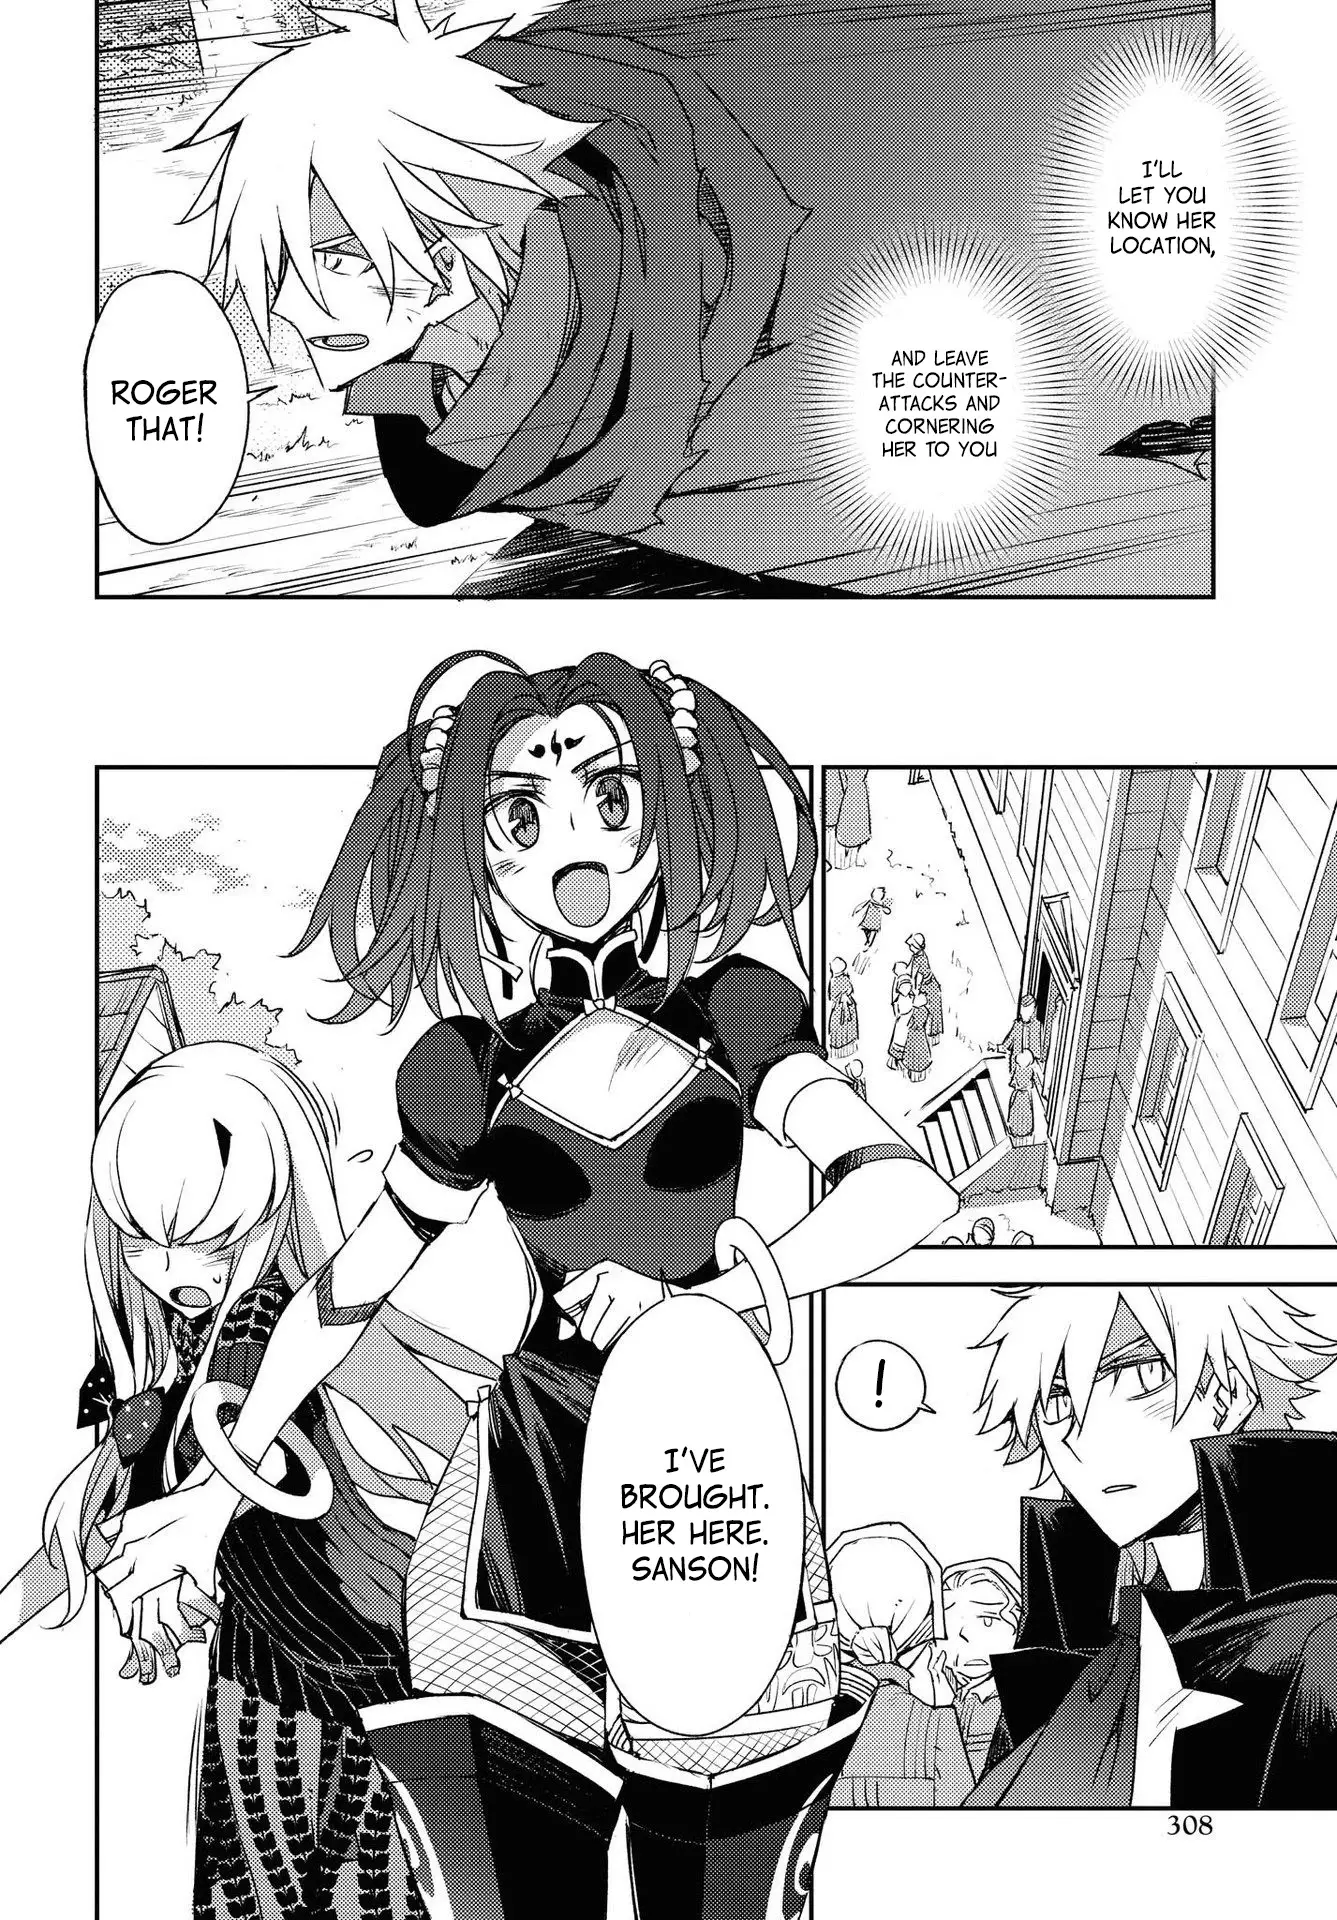 Fate/grand Order: Epic Of Remnant - Subspecies Singularity Iv: Taboo Advent Salem: Salem Of Heresy - 21 page 14-7617fcdf